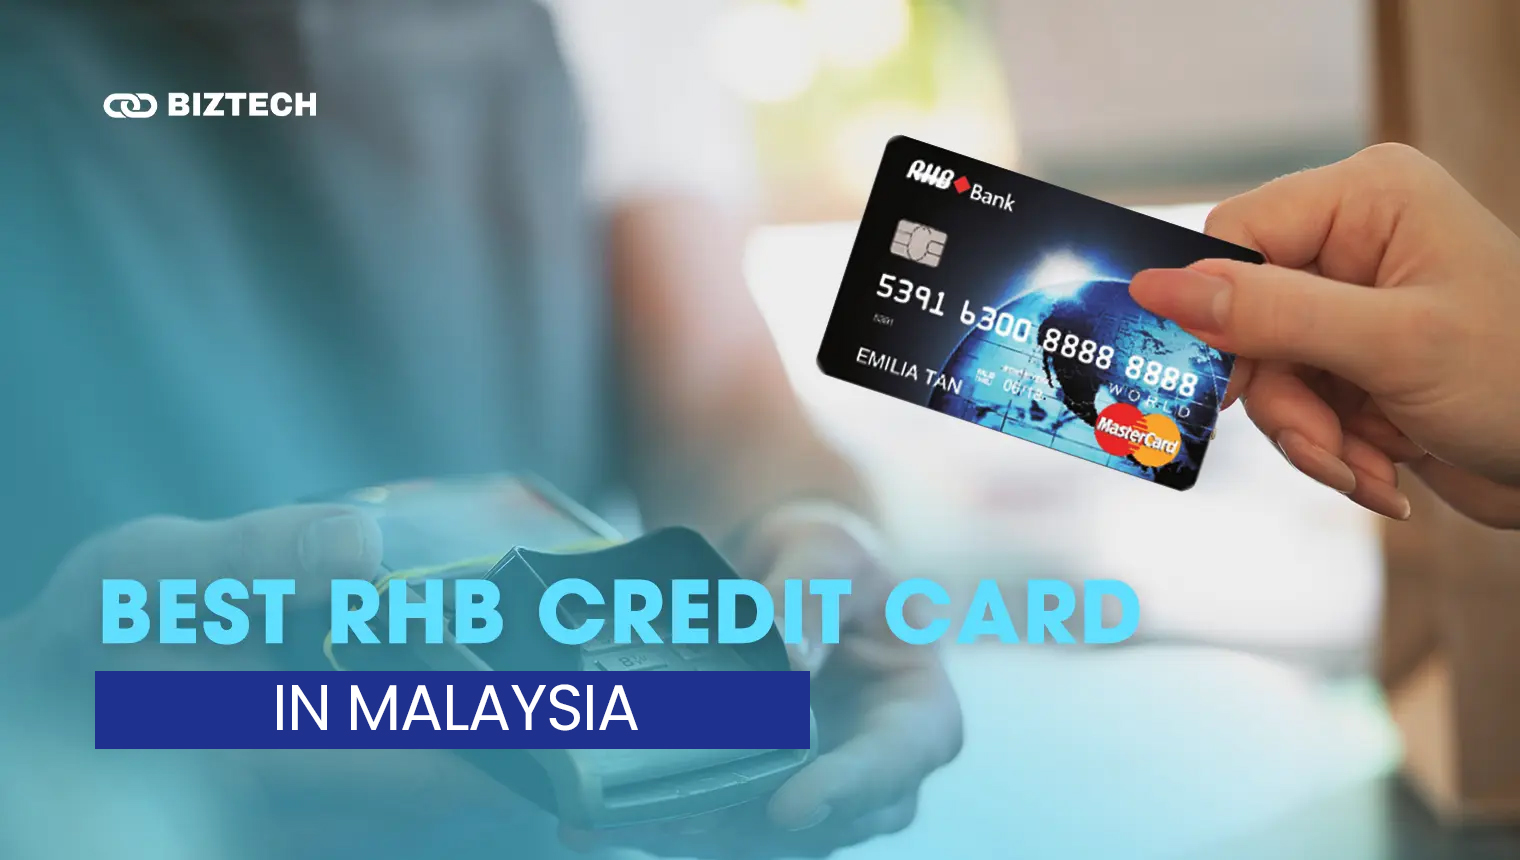 Best RHB Credit Cards in Malaysia